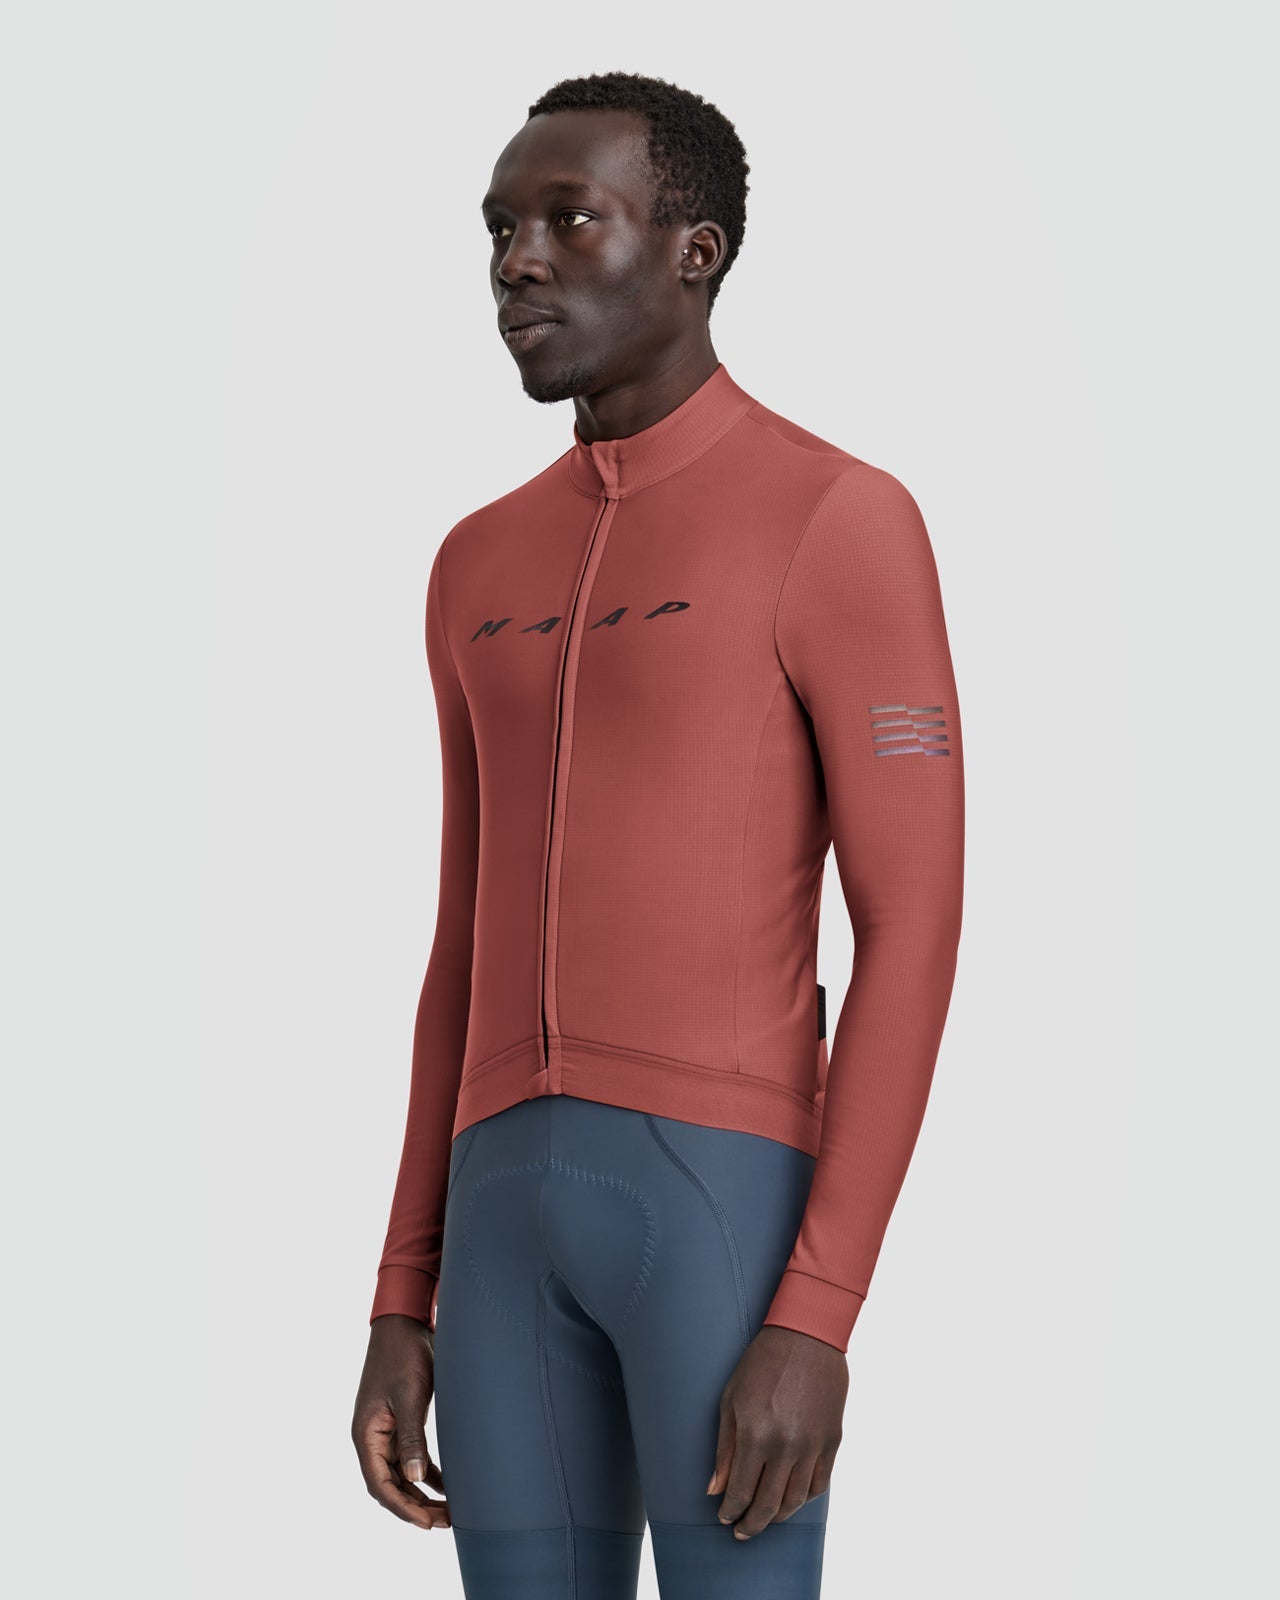 Evade Thermal LS Jersey - Henna